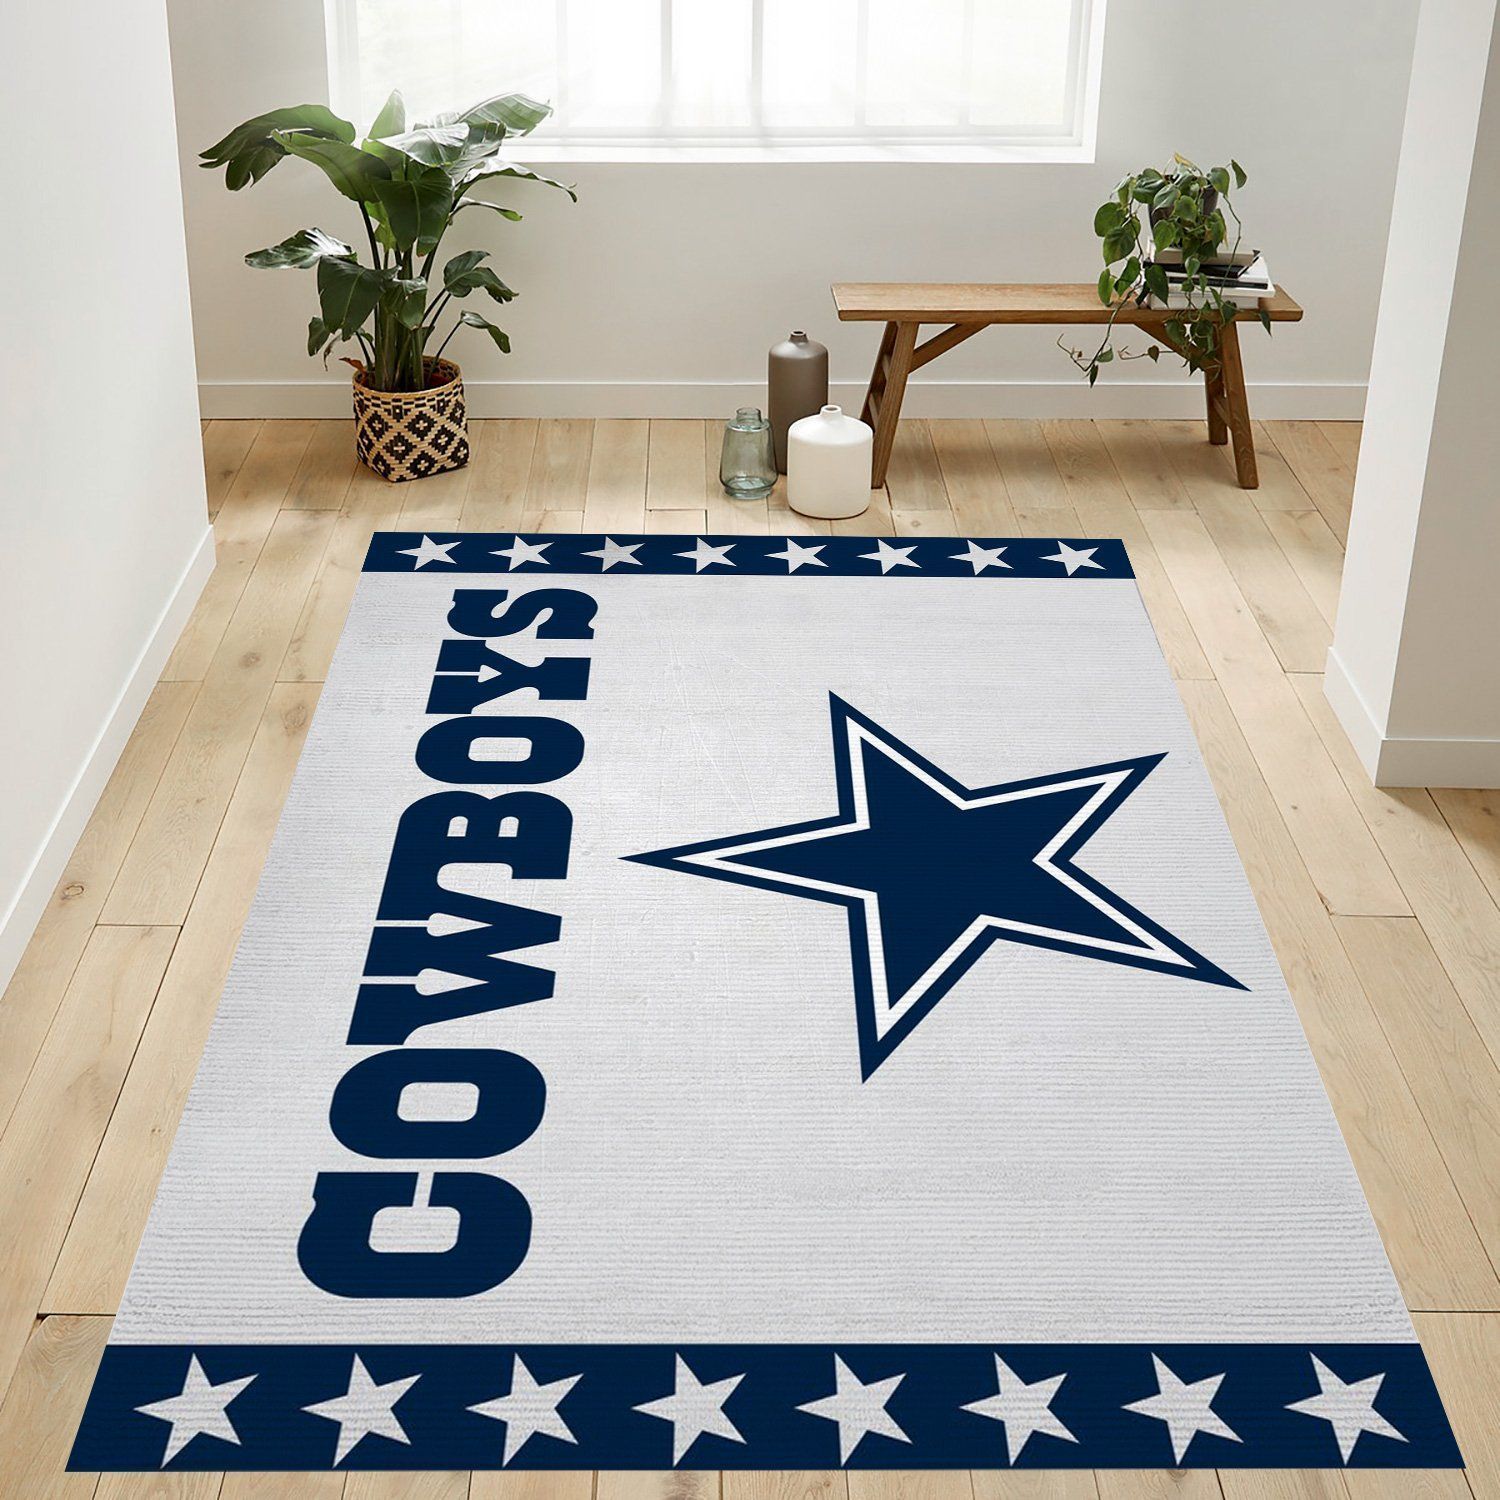 Dallas Cowboys Banner Nfl Logo Area Rug For Gift Living Room Rug Home Decor Floor Decor - Indoor Outdoor Rugs